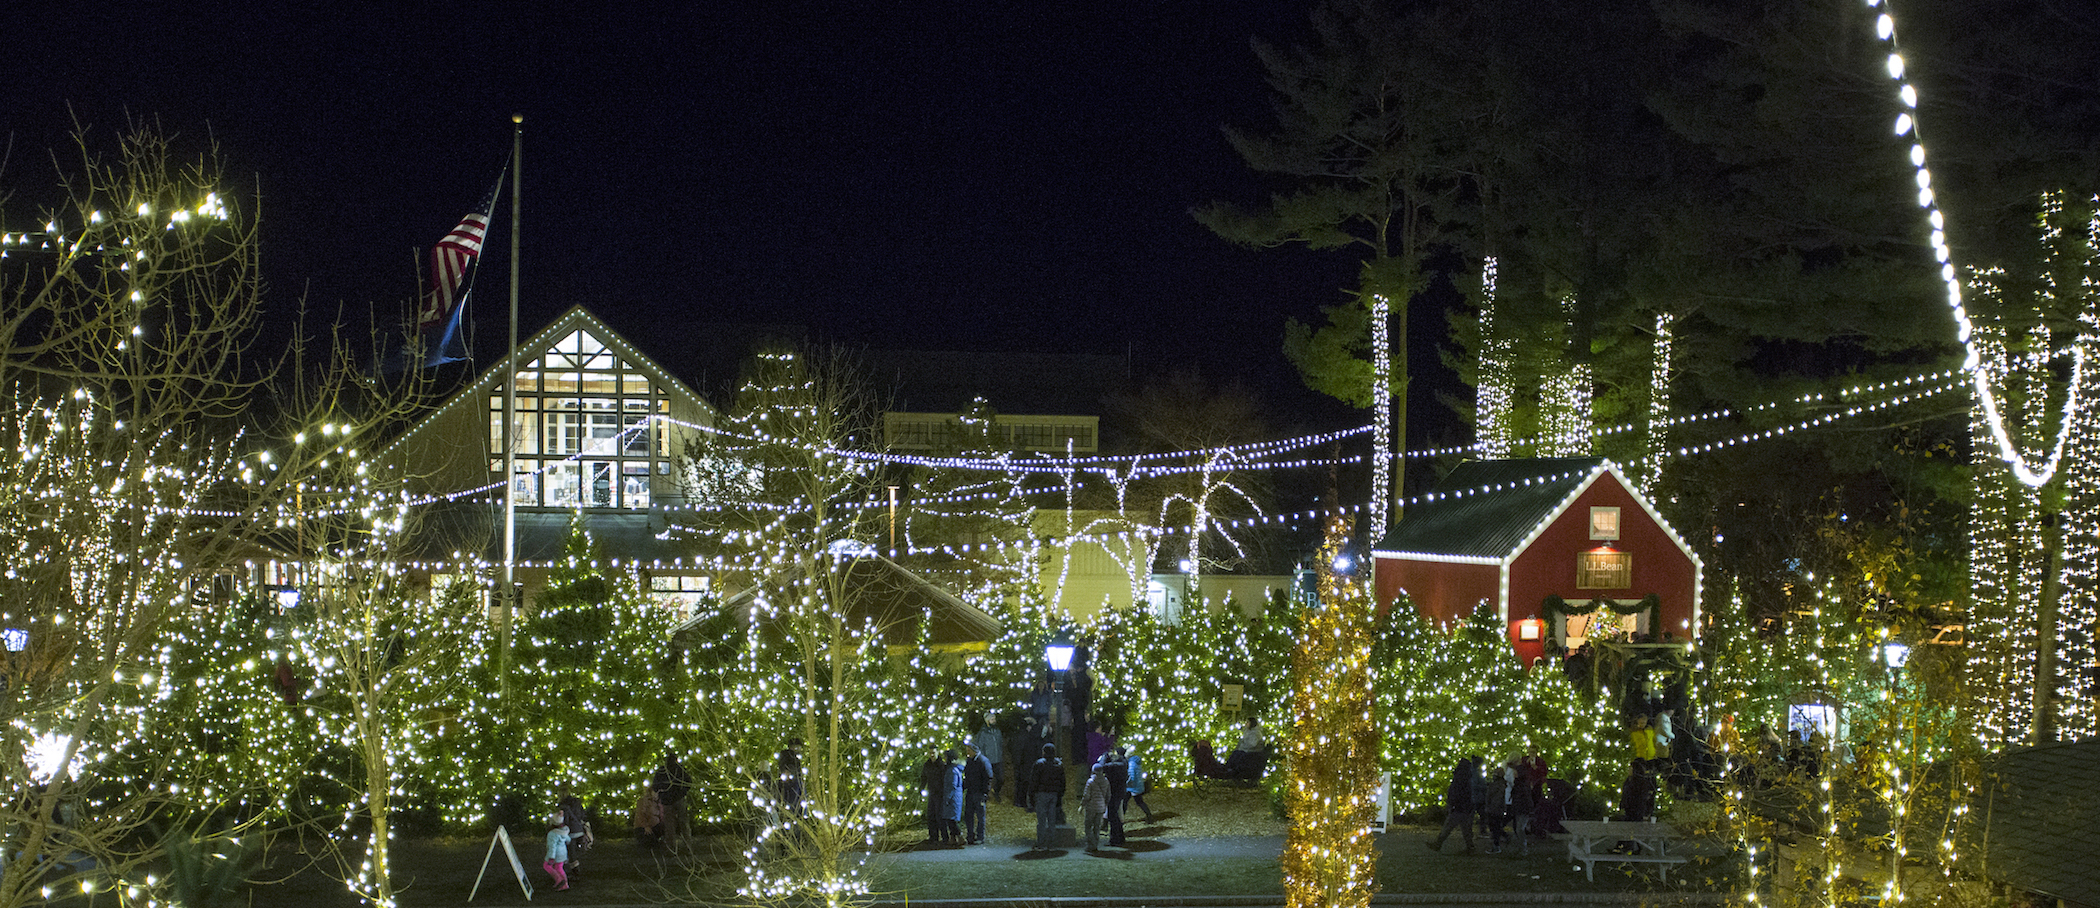 L.L.Bean LightsUp the Holidays with Northern Lights Celebration